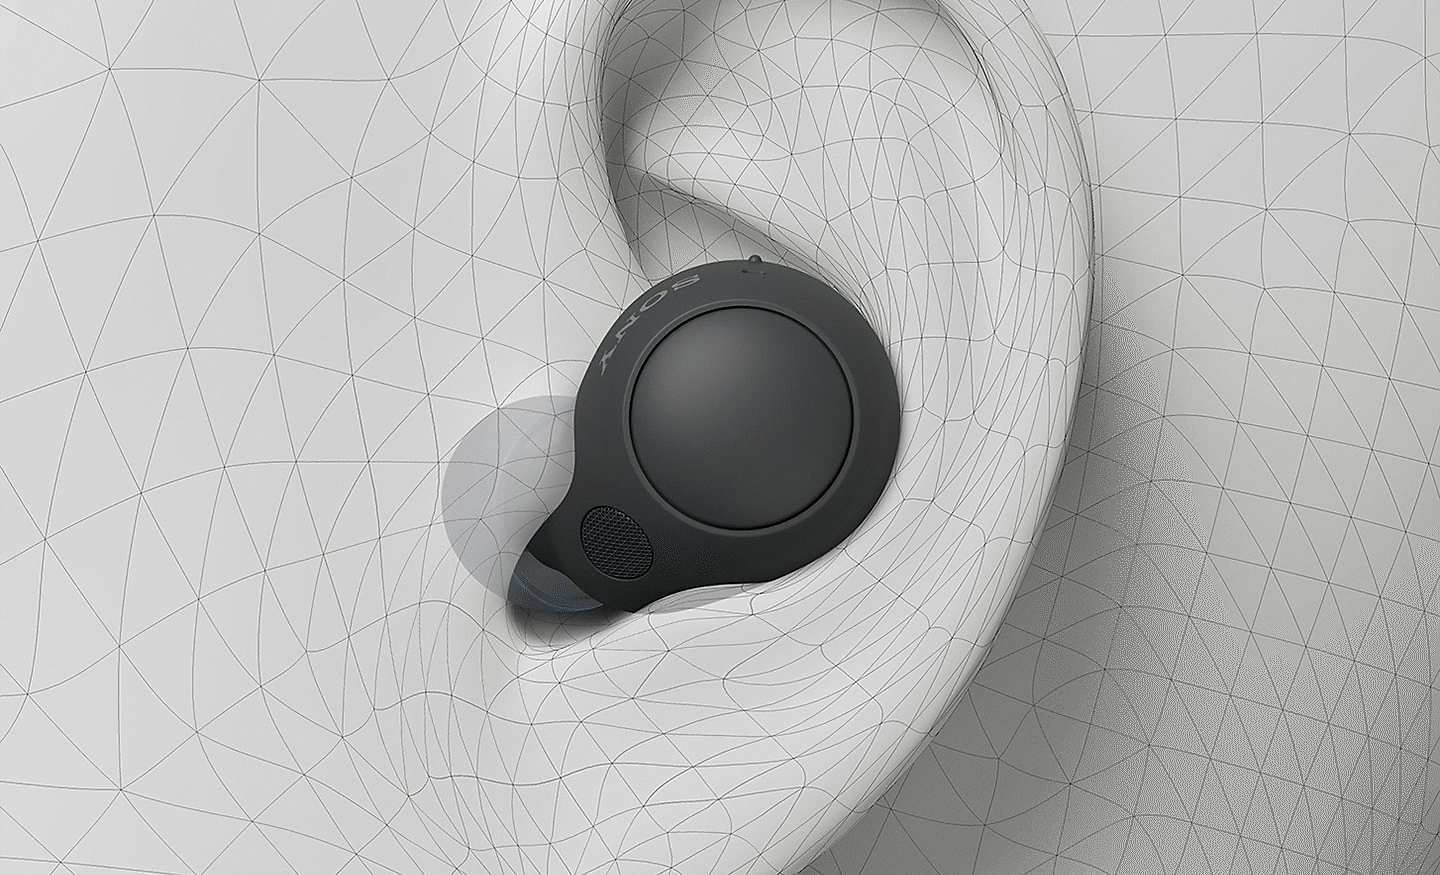 Image of a WF-C700N Wireless Noise Cancelling headphone in a computer-generated ear